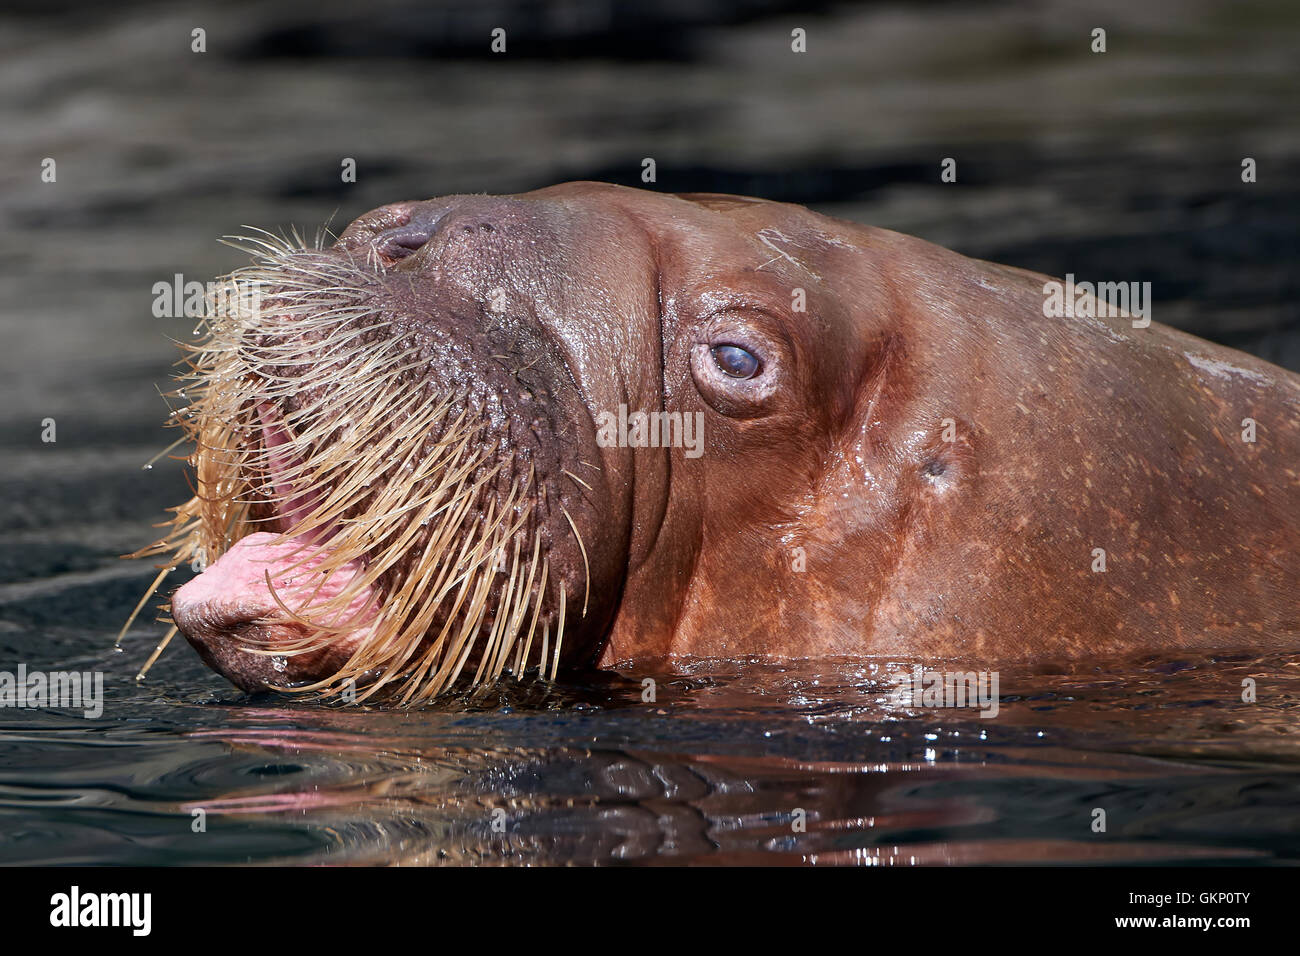 Closeup portrait of the Pacific Walrus seen from the side with its head over the water Stock Photo